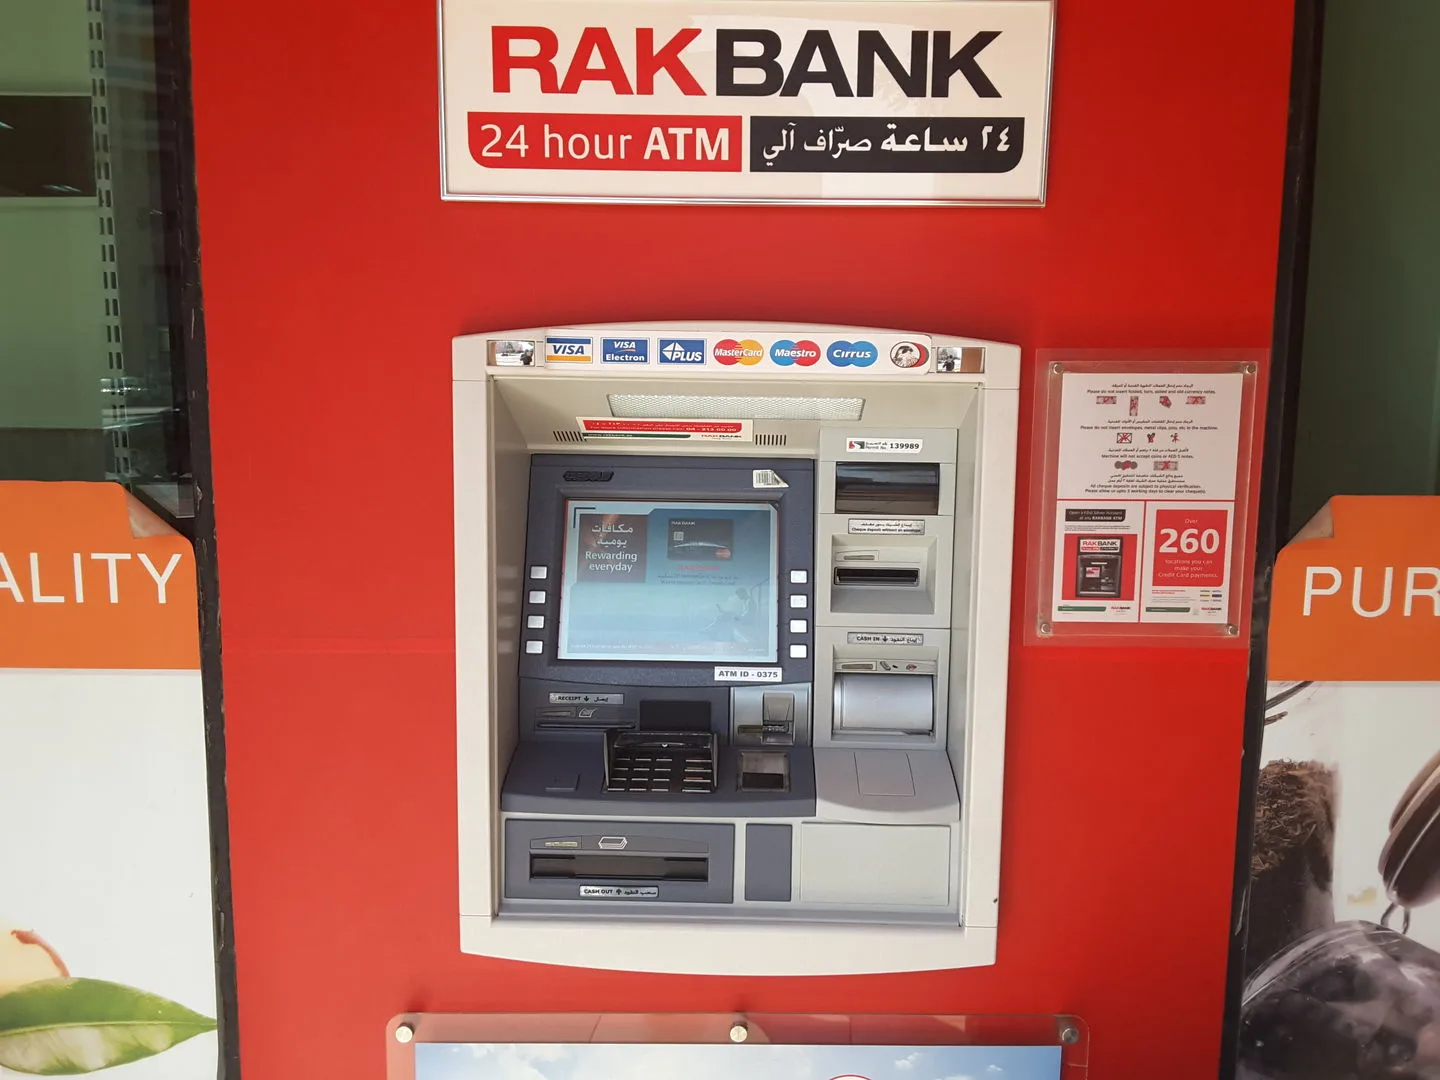 List of RAKBANK Branches and ATMs in Dubai